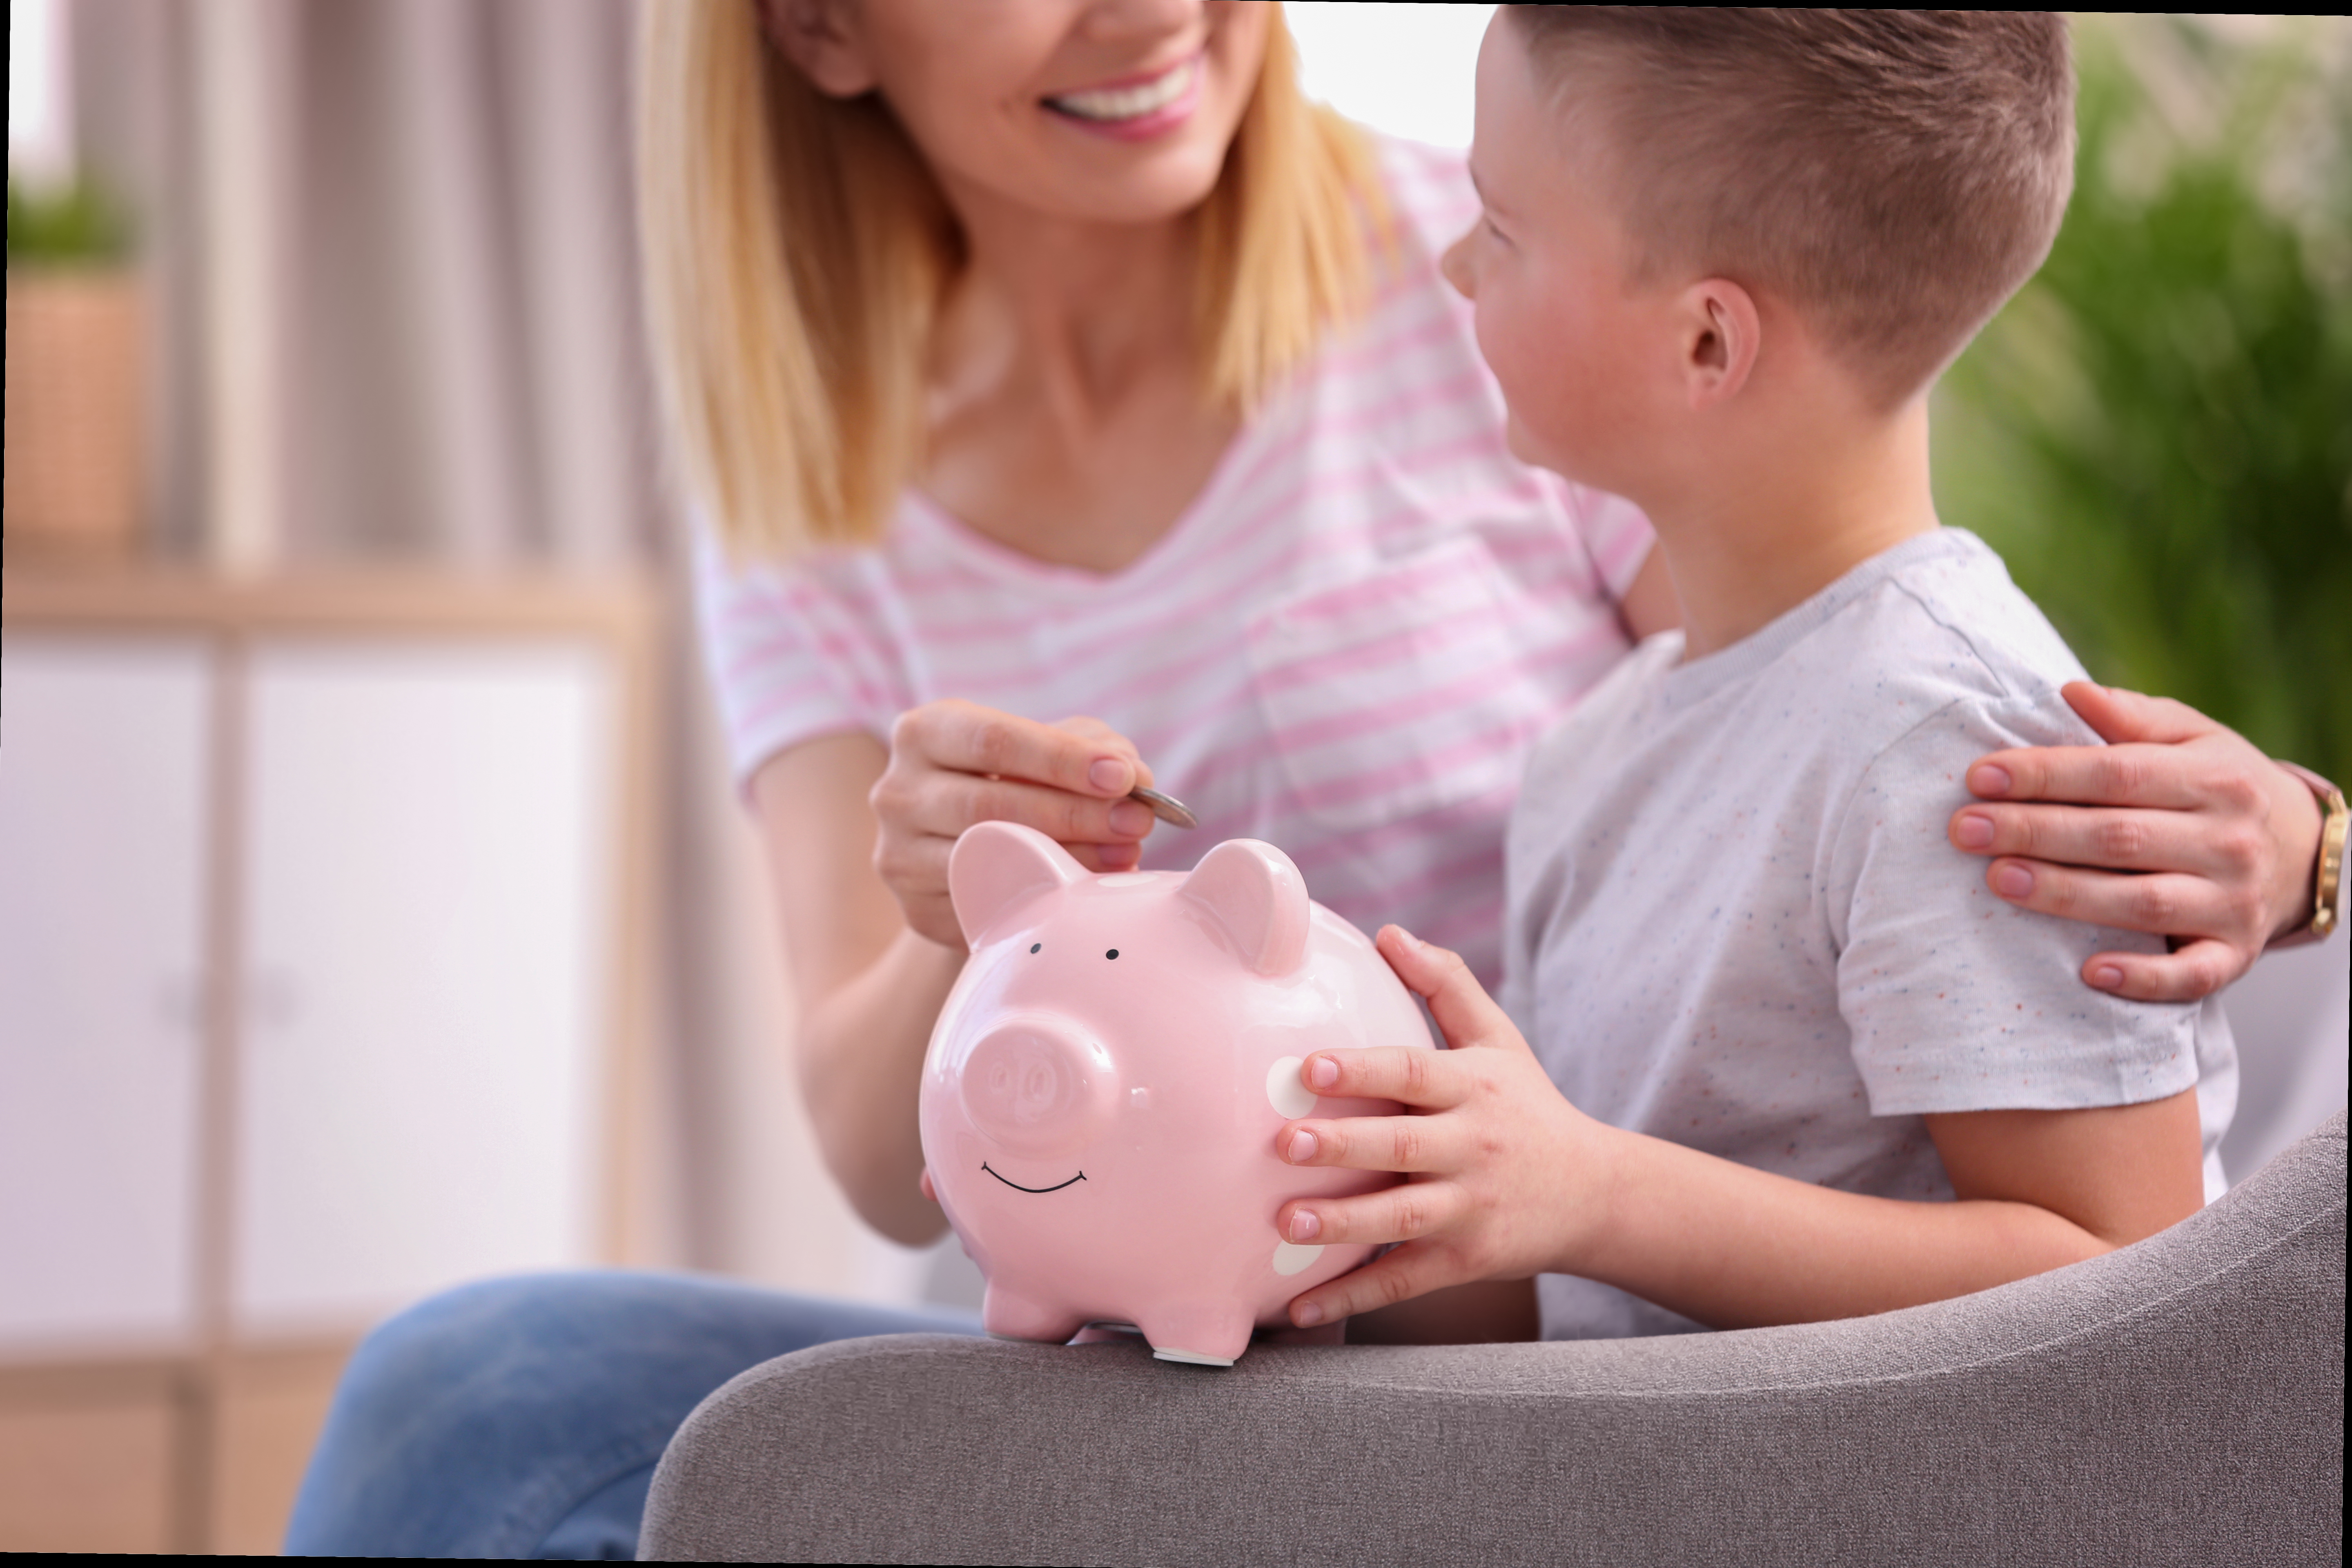 Teaching children about the value of money